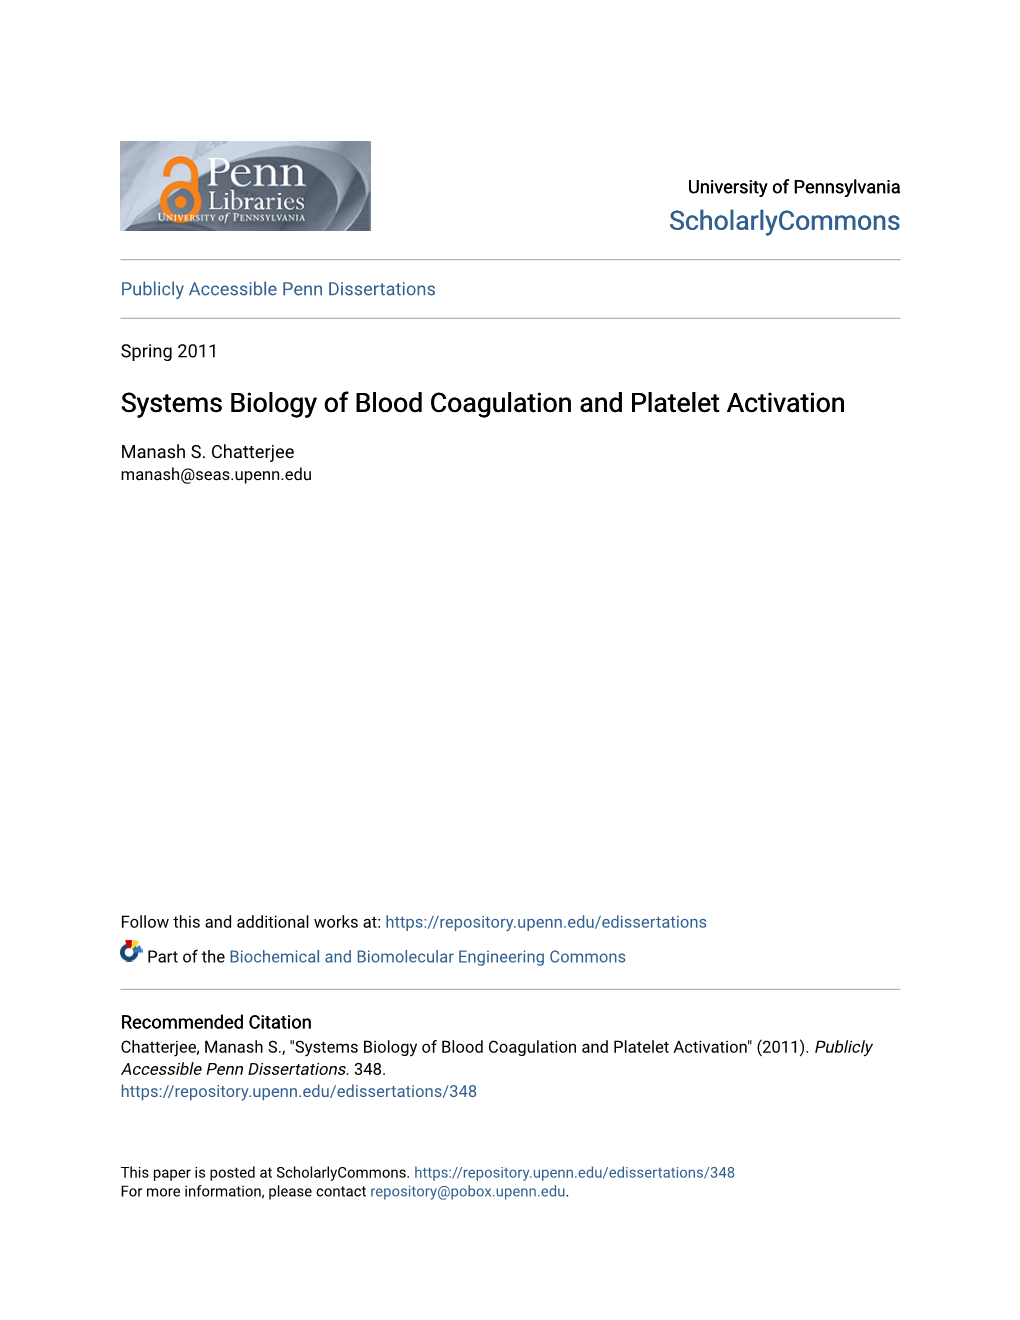 Systems Biology of Blood Coagulation and Platelet Activation